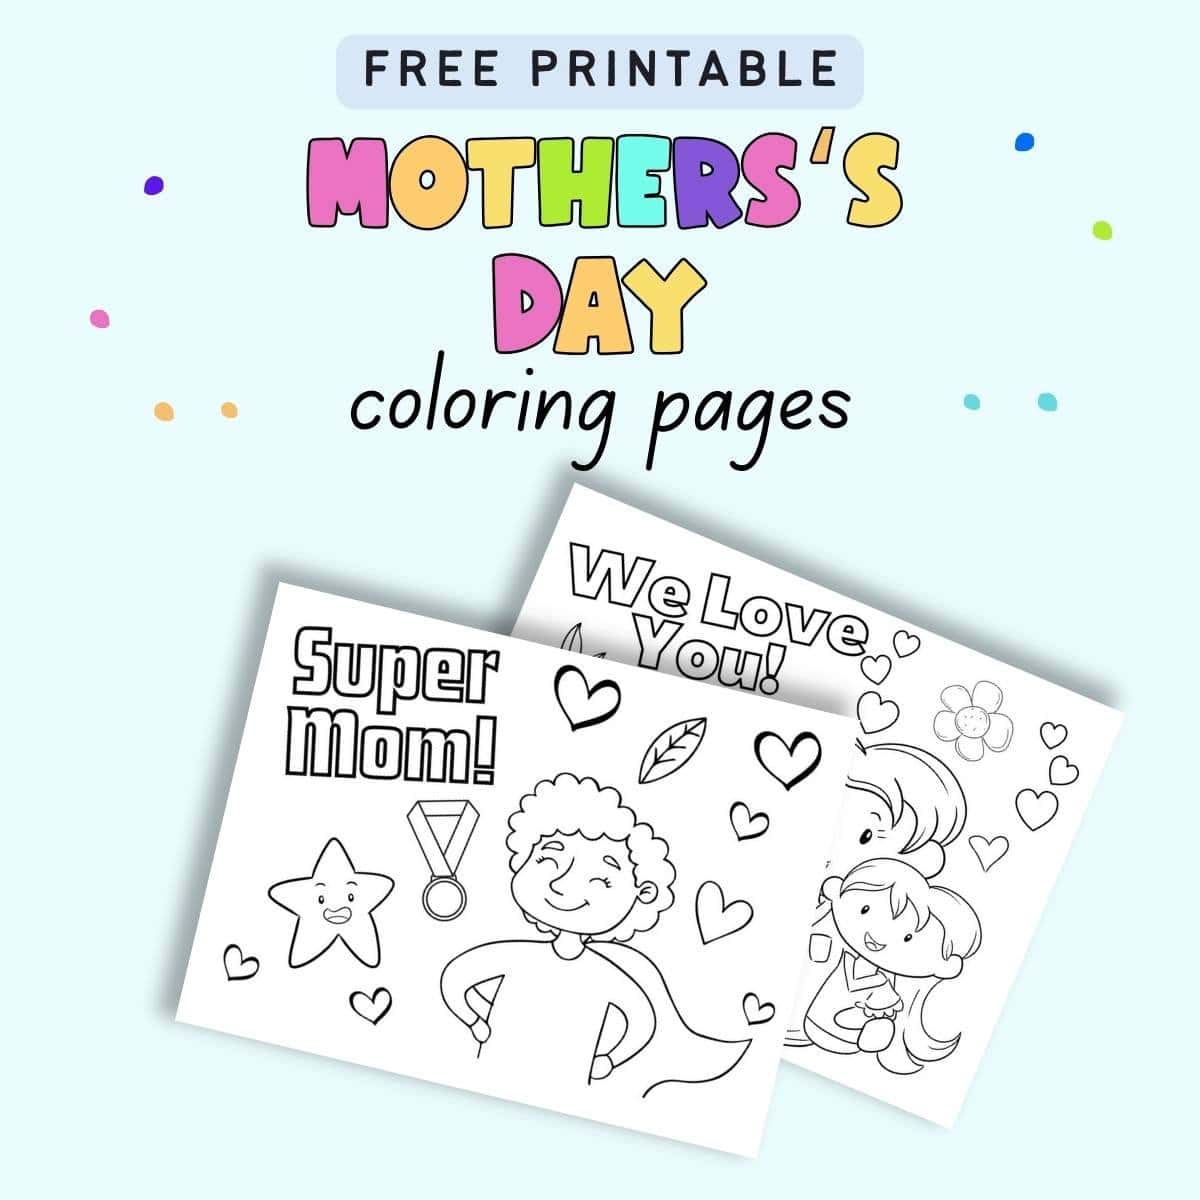 Text "free printable Mother's Day coloring pages" with a preview of two coloring pages for Mother's Day